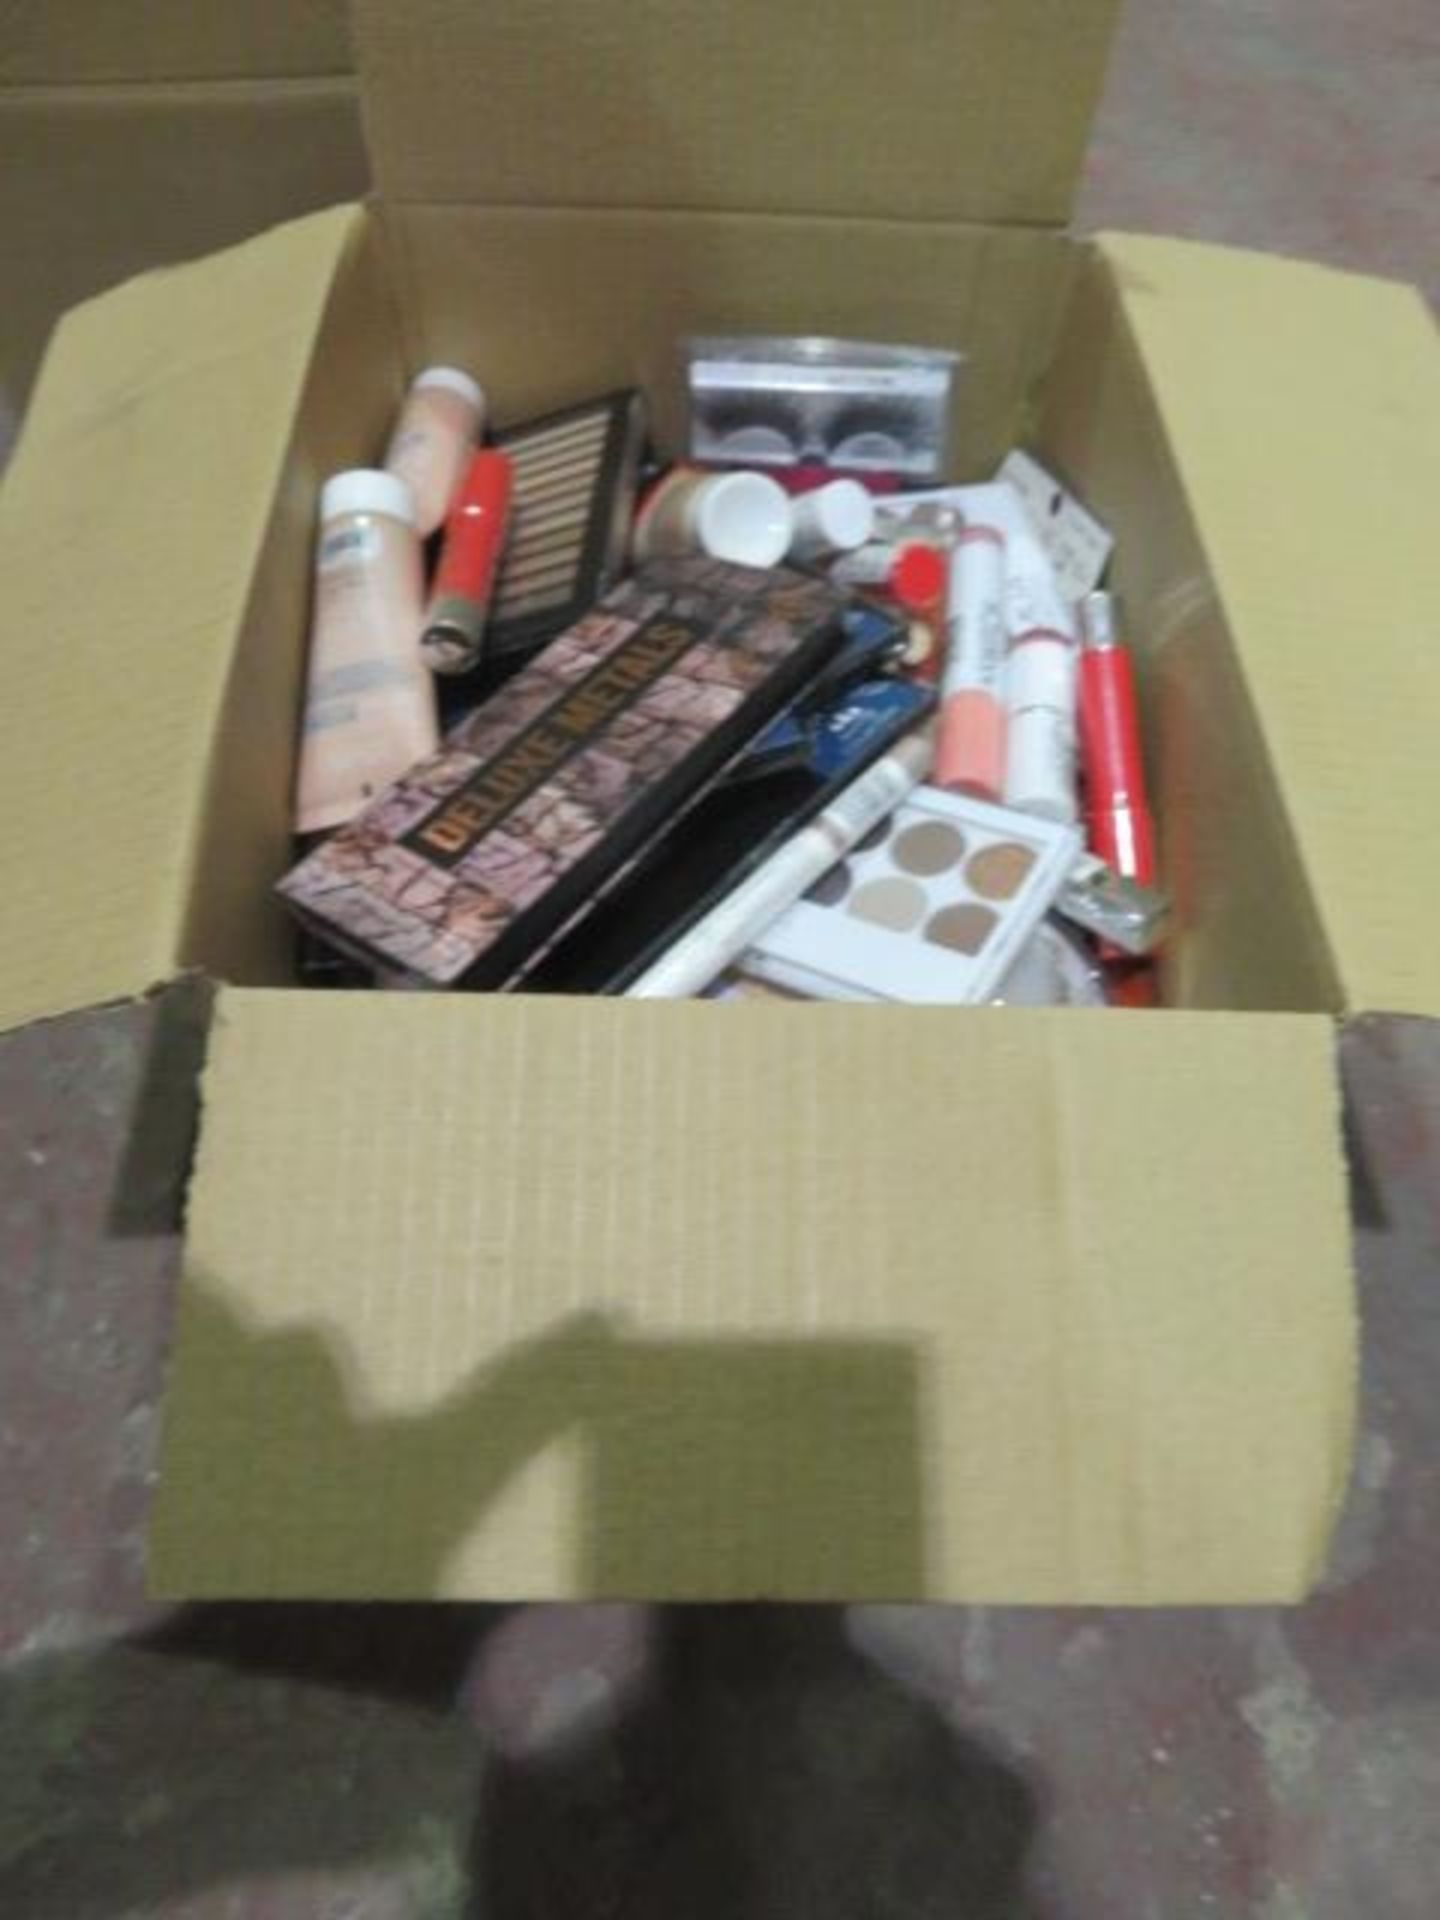 (Z83) Circa. 200 items of various new make up acadamy make up to include: deluxe metals eyeshad... - Image 2 of 2